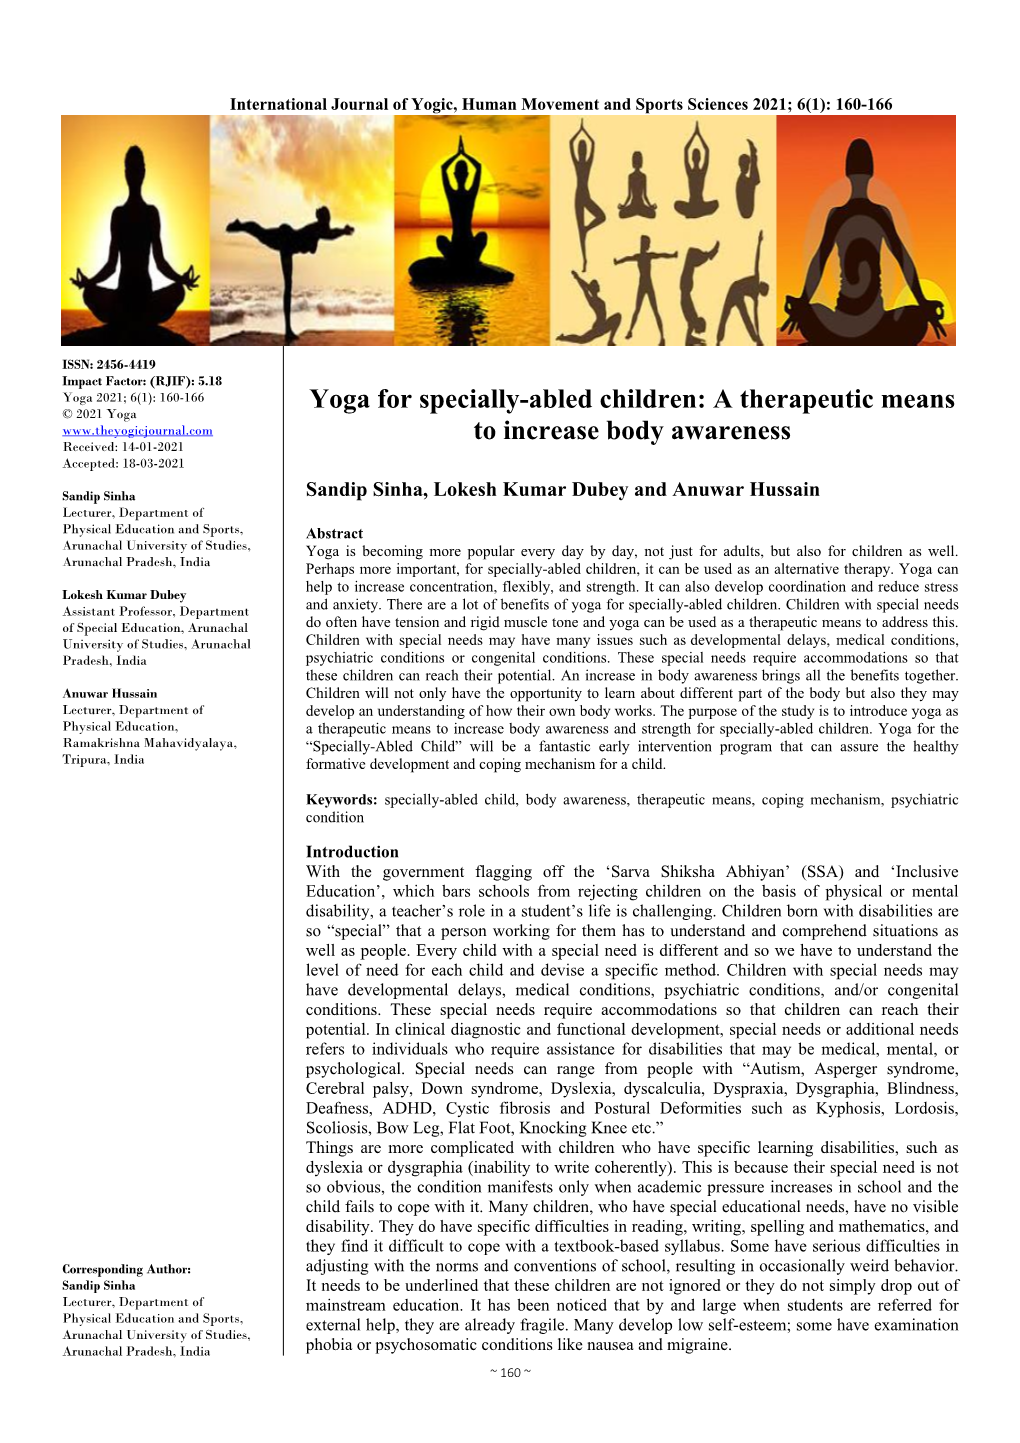 Yoga for Specially-Abled Children: a Therapeutic Means to Increase Body